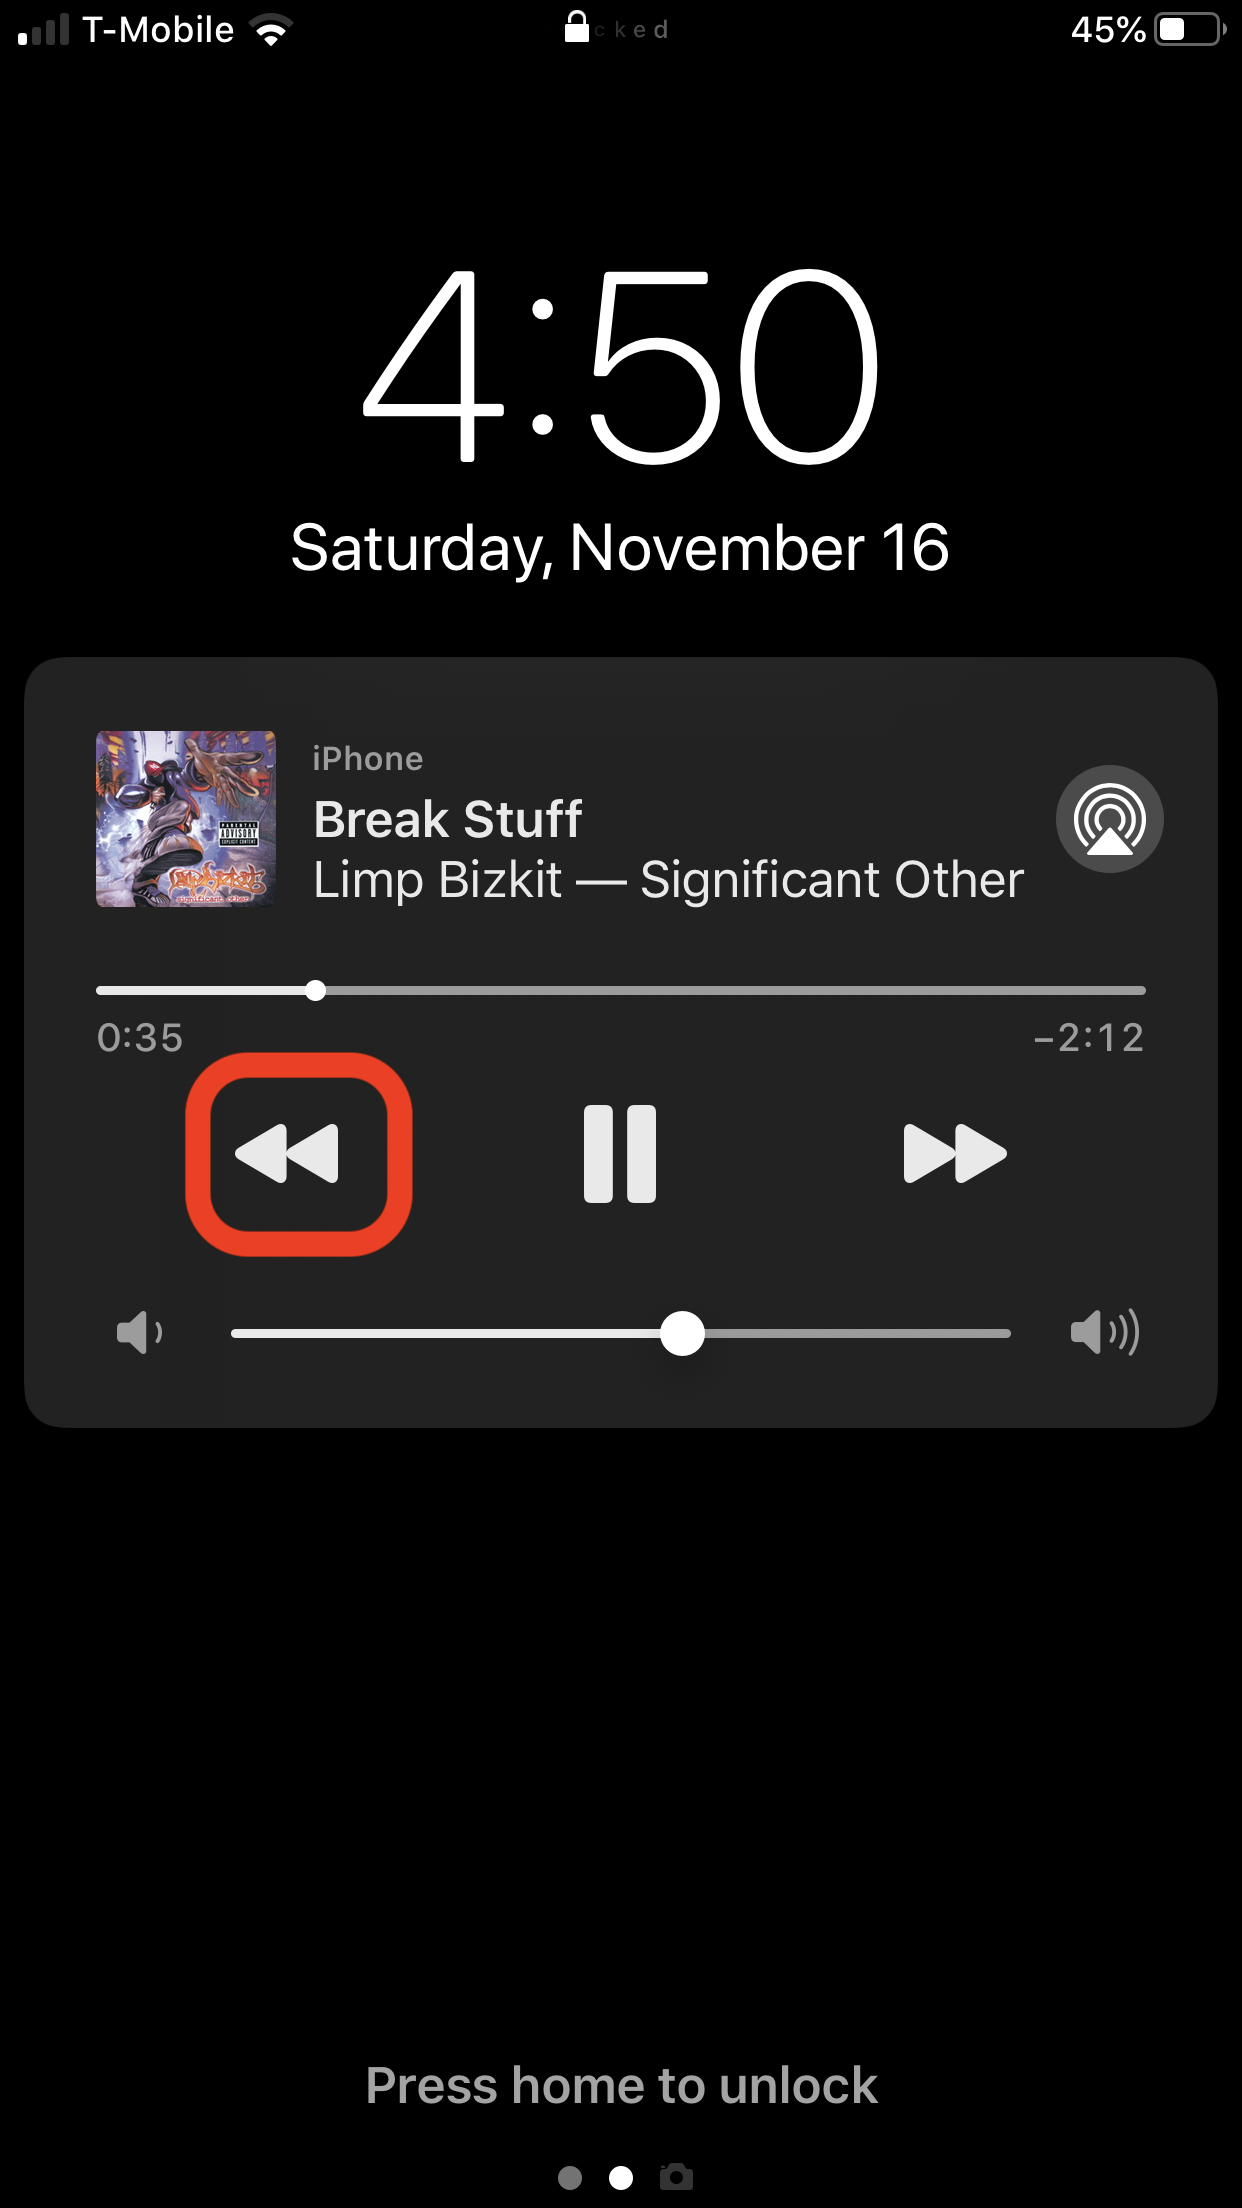 Previous Song Button on Lock Screen - iPhone - The Spotify Community